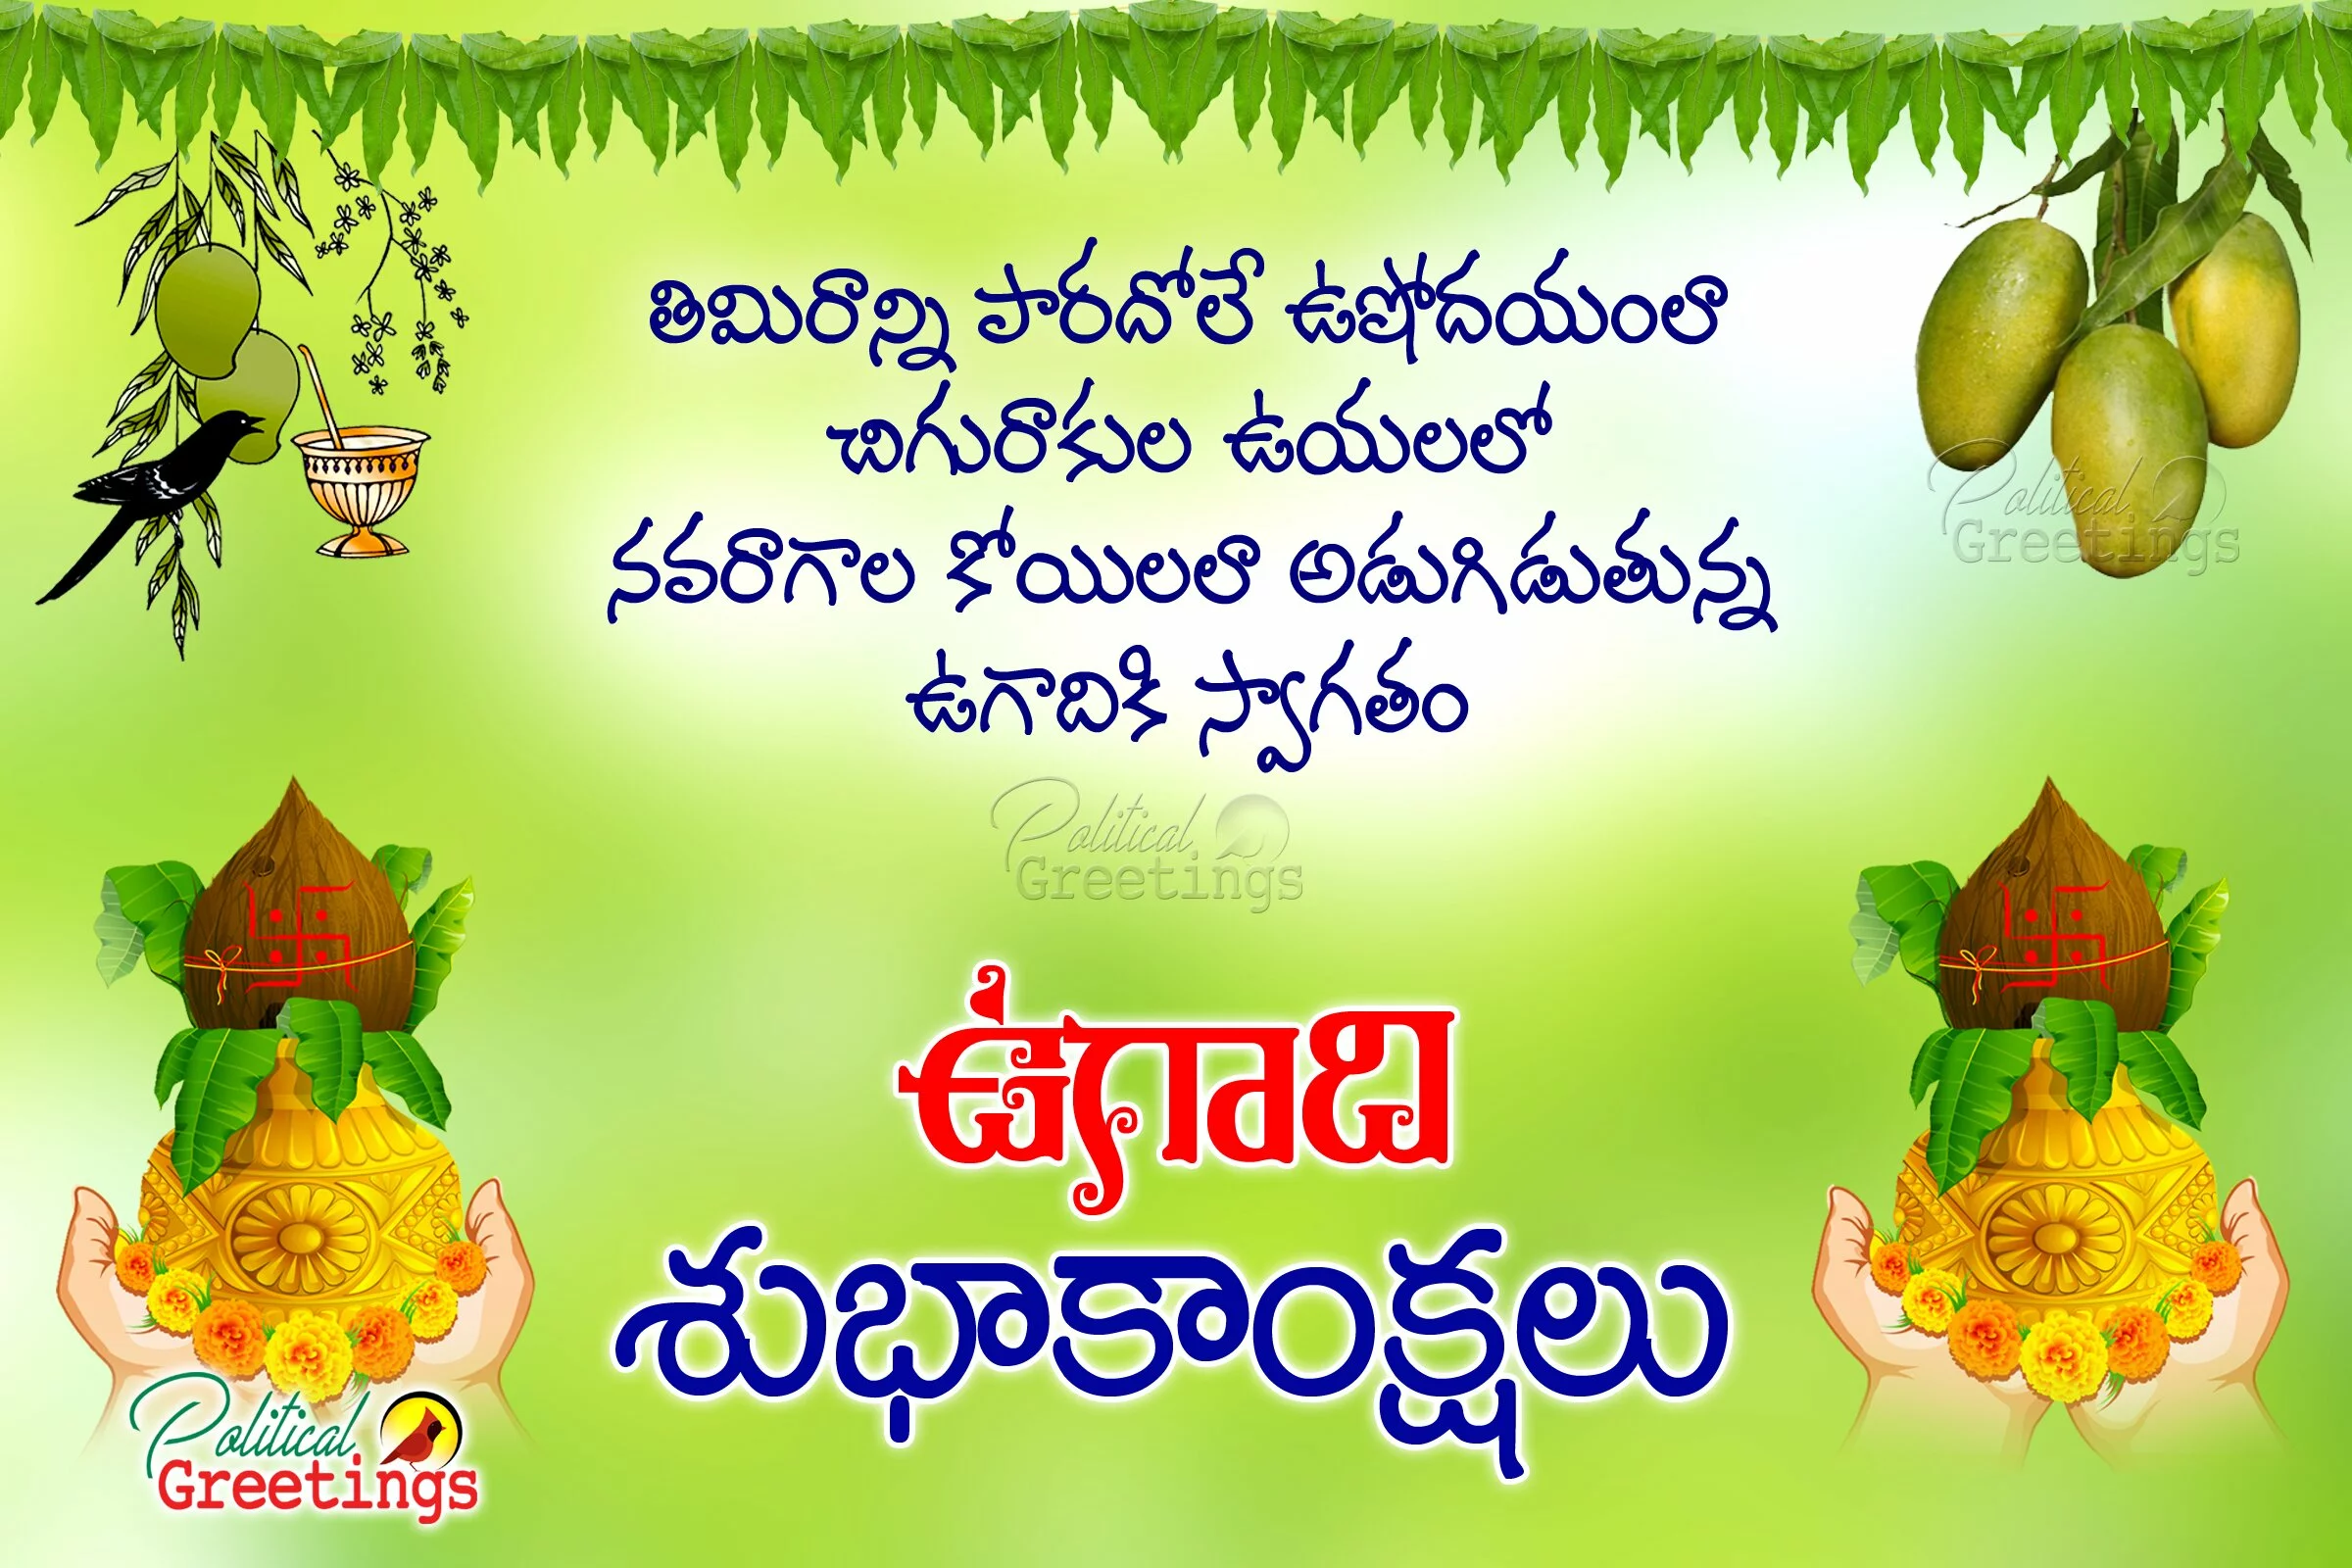 happy-ugadi-2017-telugu-wishes-quotes-greetings-sms-messages-political-greetings3